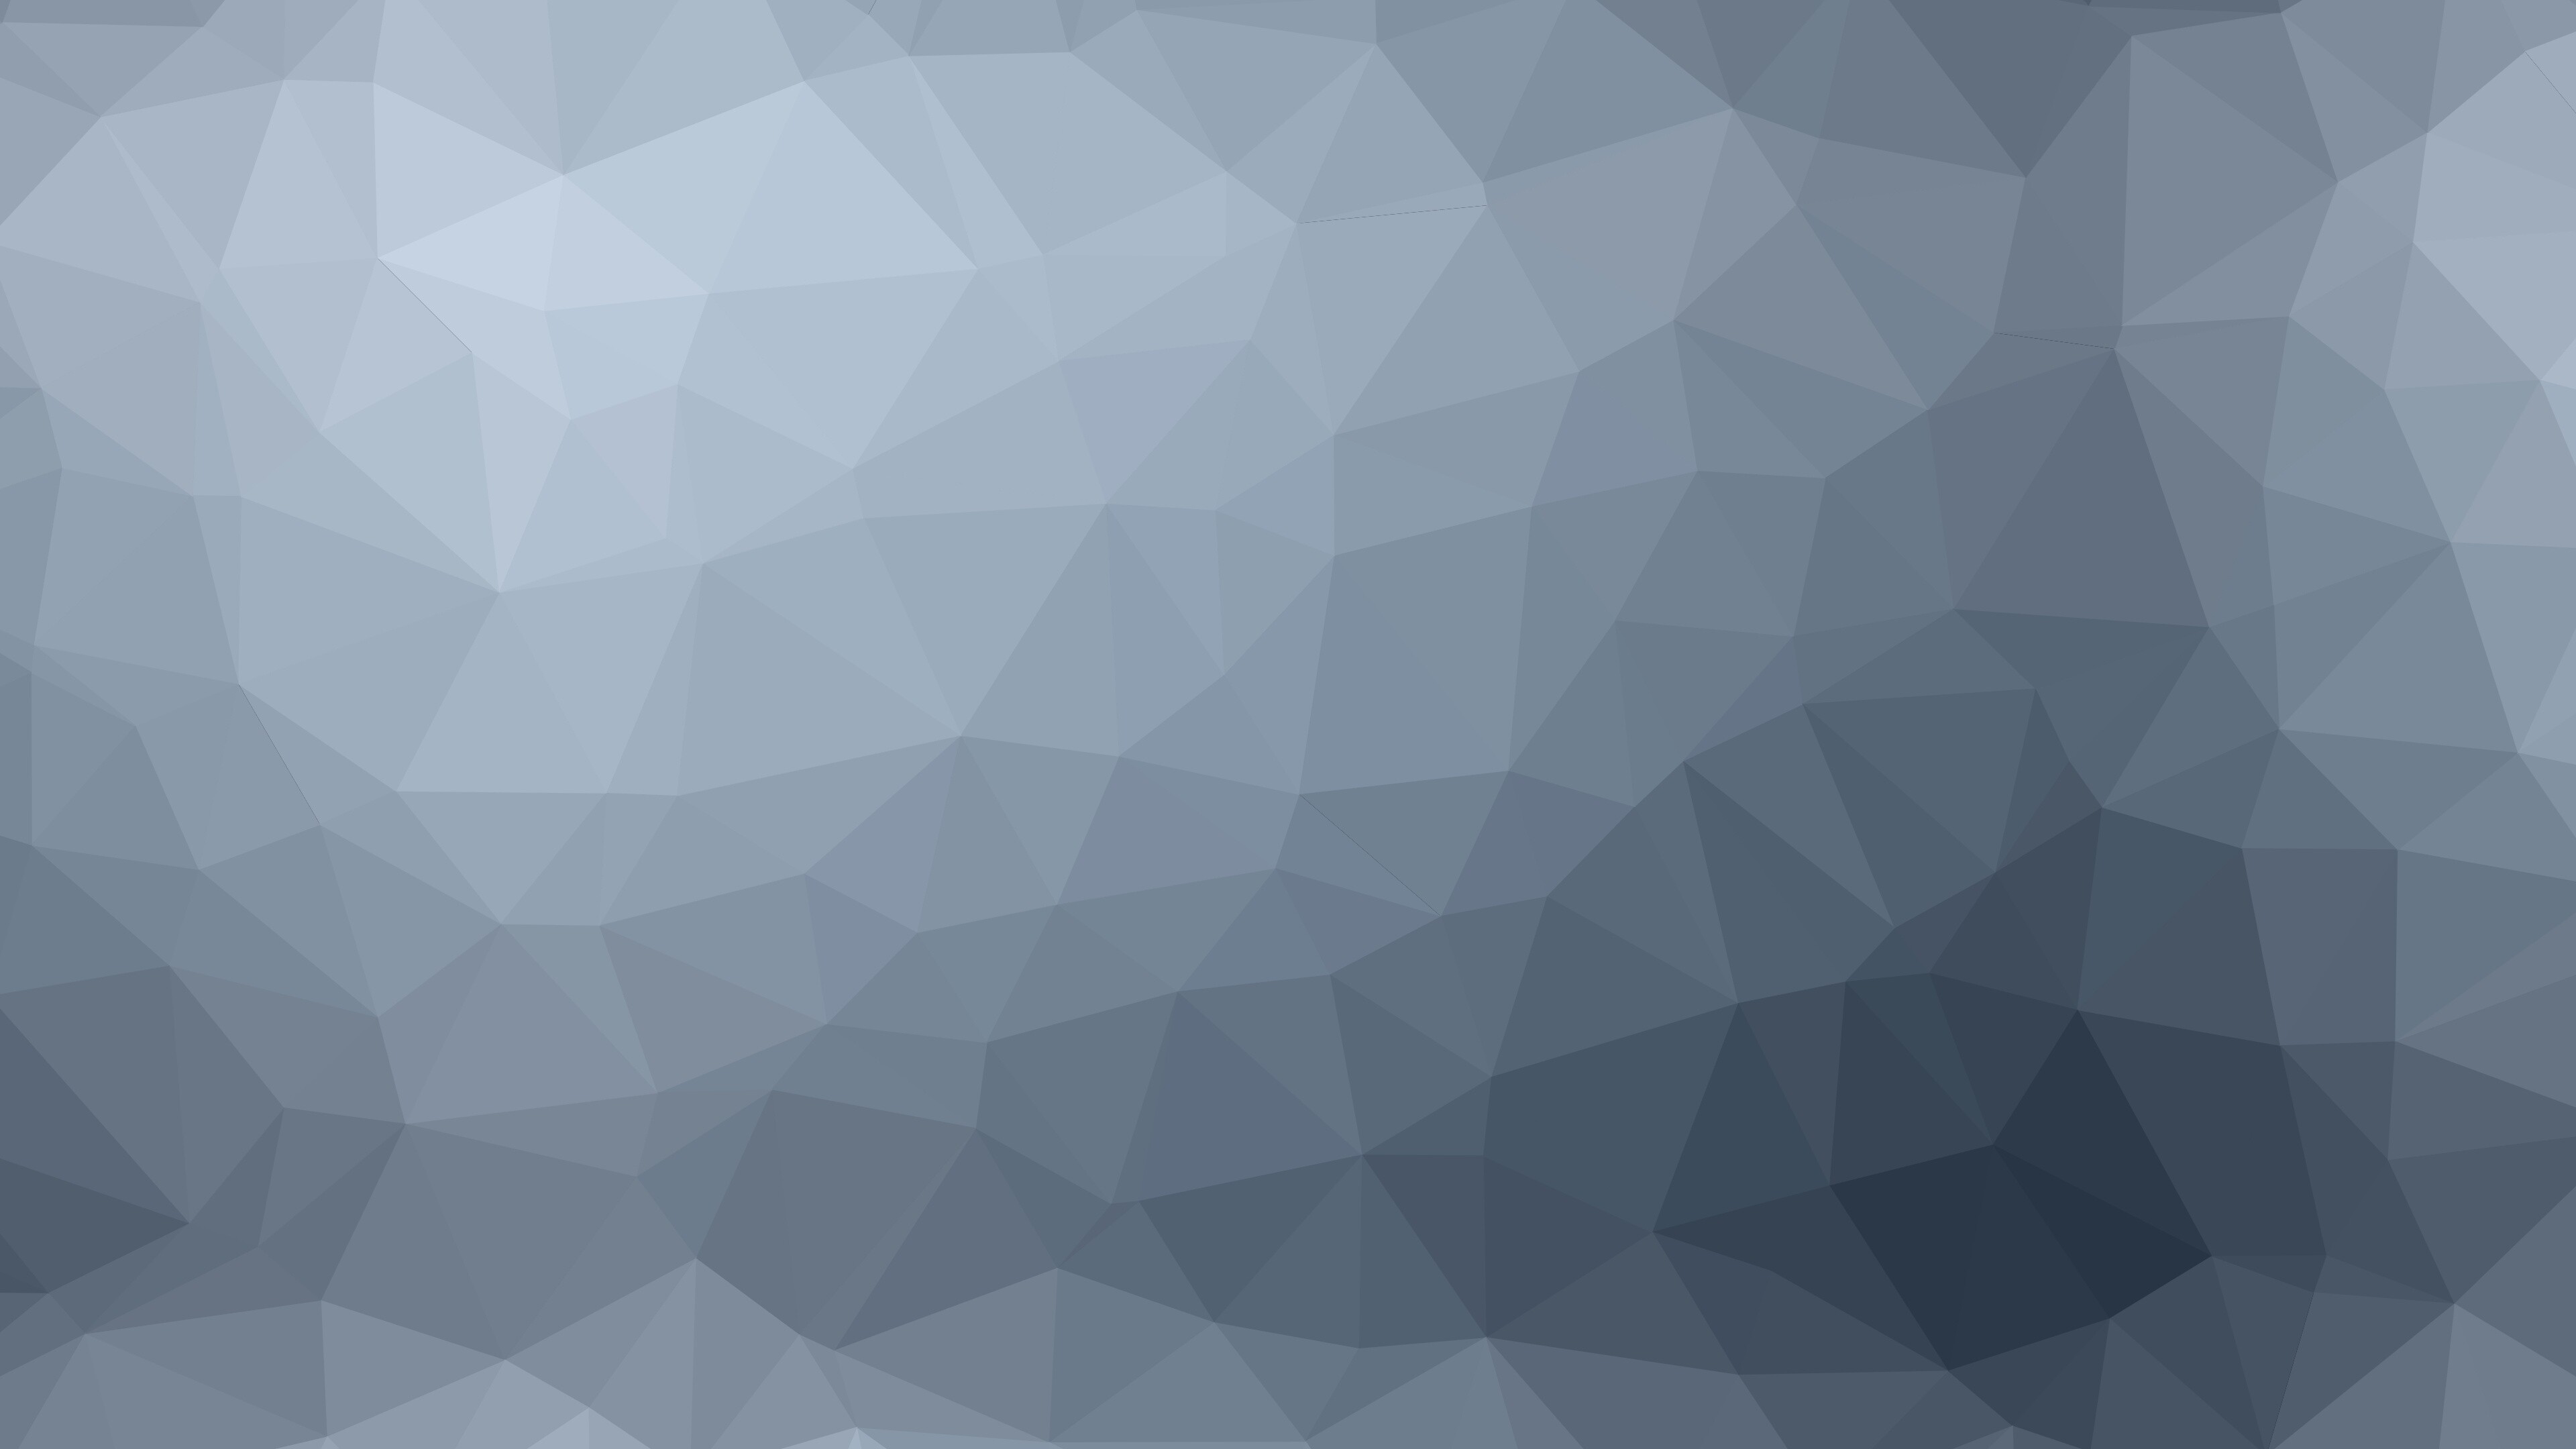 Geometric Abstract: Gray triangles, Gradient, Supplementary angles. 3840x2160 4K Wallpaper.